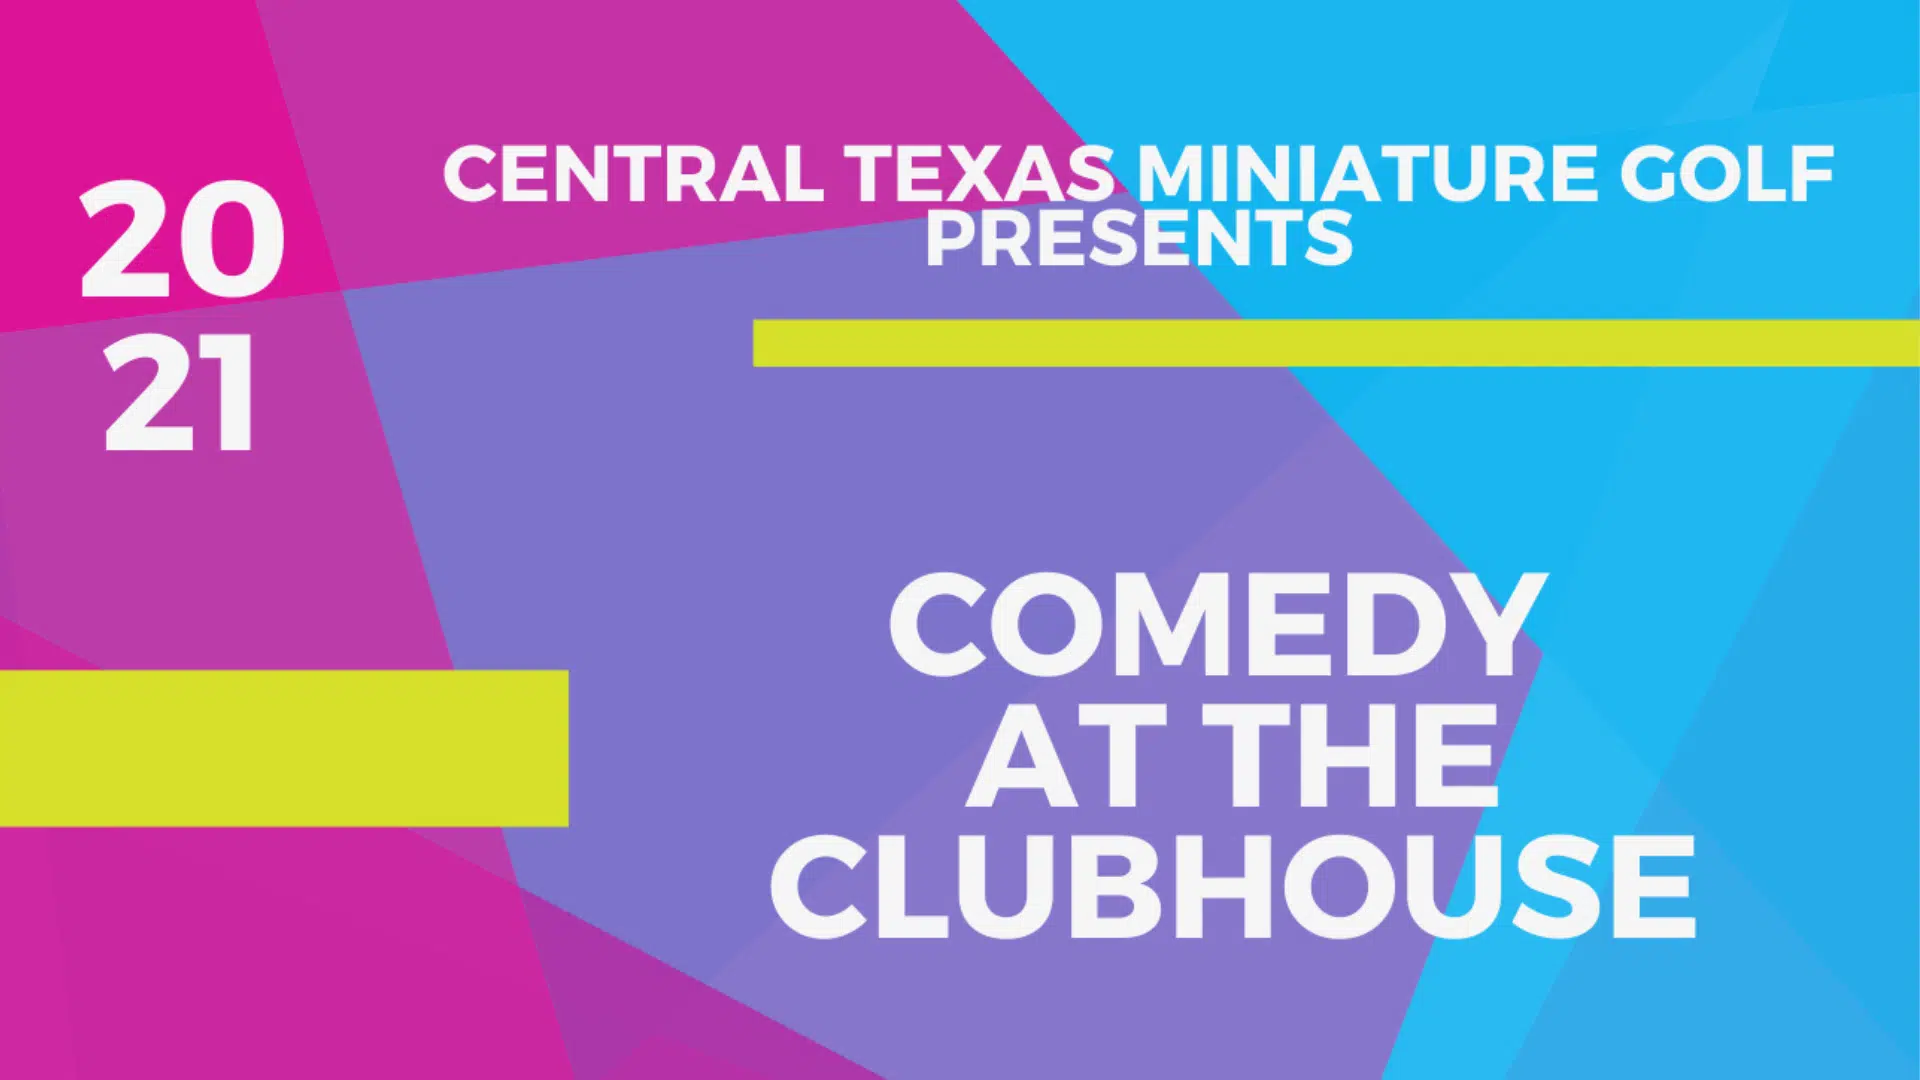 Comedy at the Clubhouse Central Texas Mini Golf Georgetown Texas